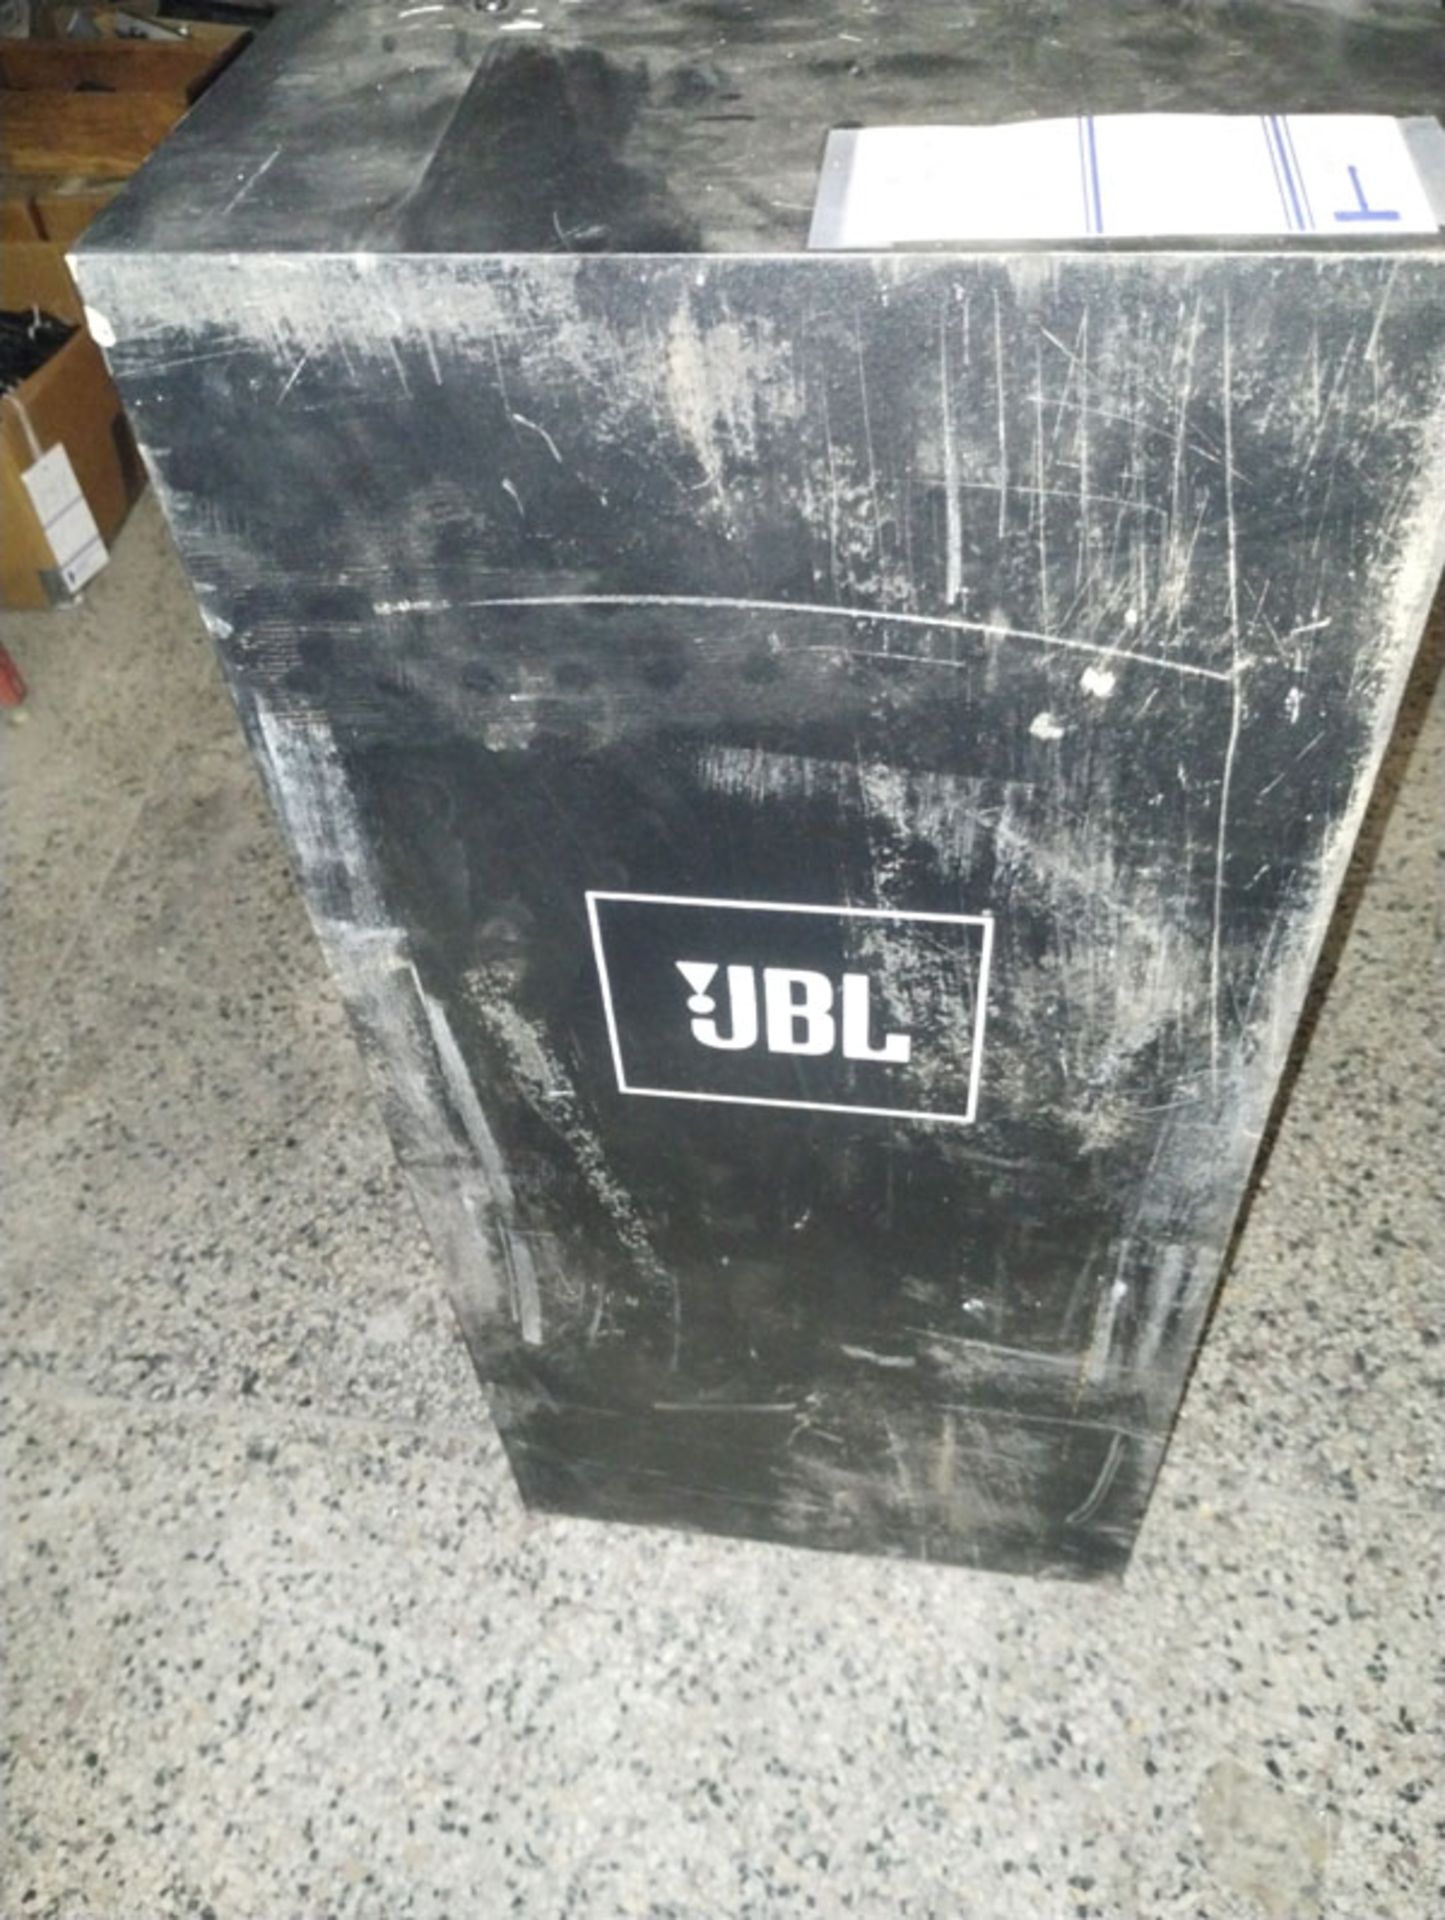 JBL PROFESSIONAL SERIES MODEL: 4648TH 15" SUBWOOFER - 26x18x39" TOTAL DIMENSIONS - Image 2 of 7